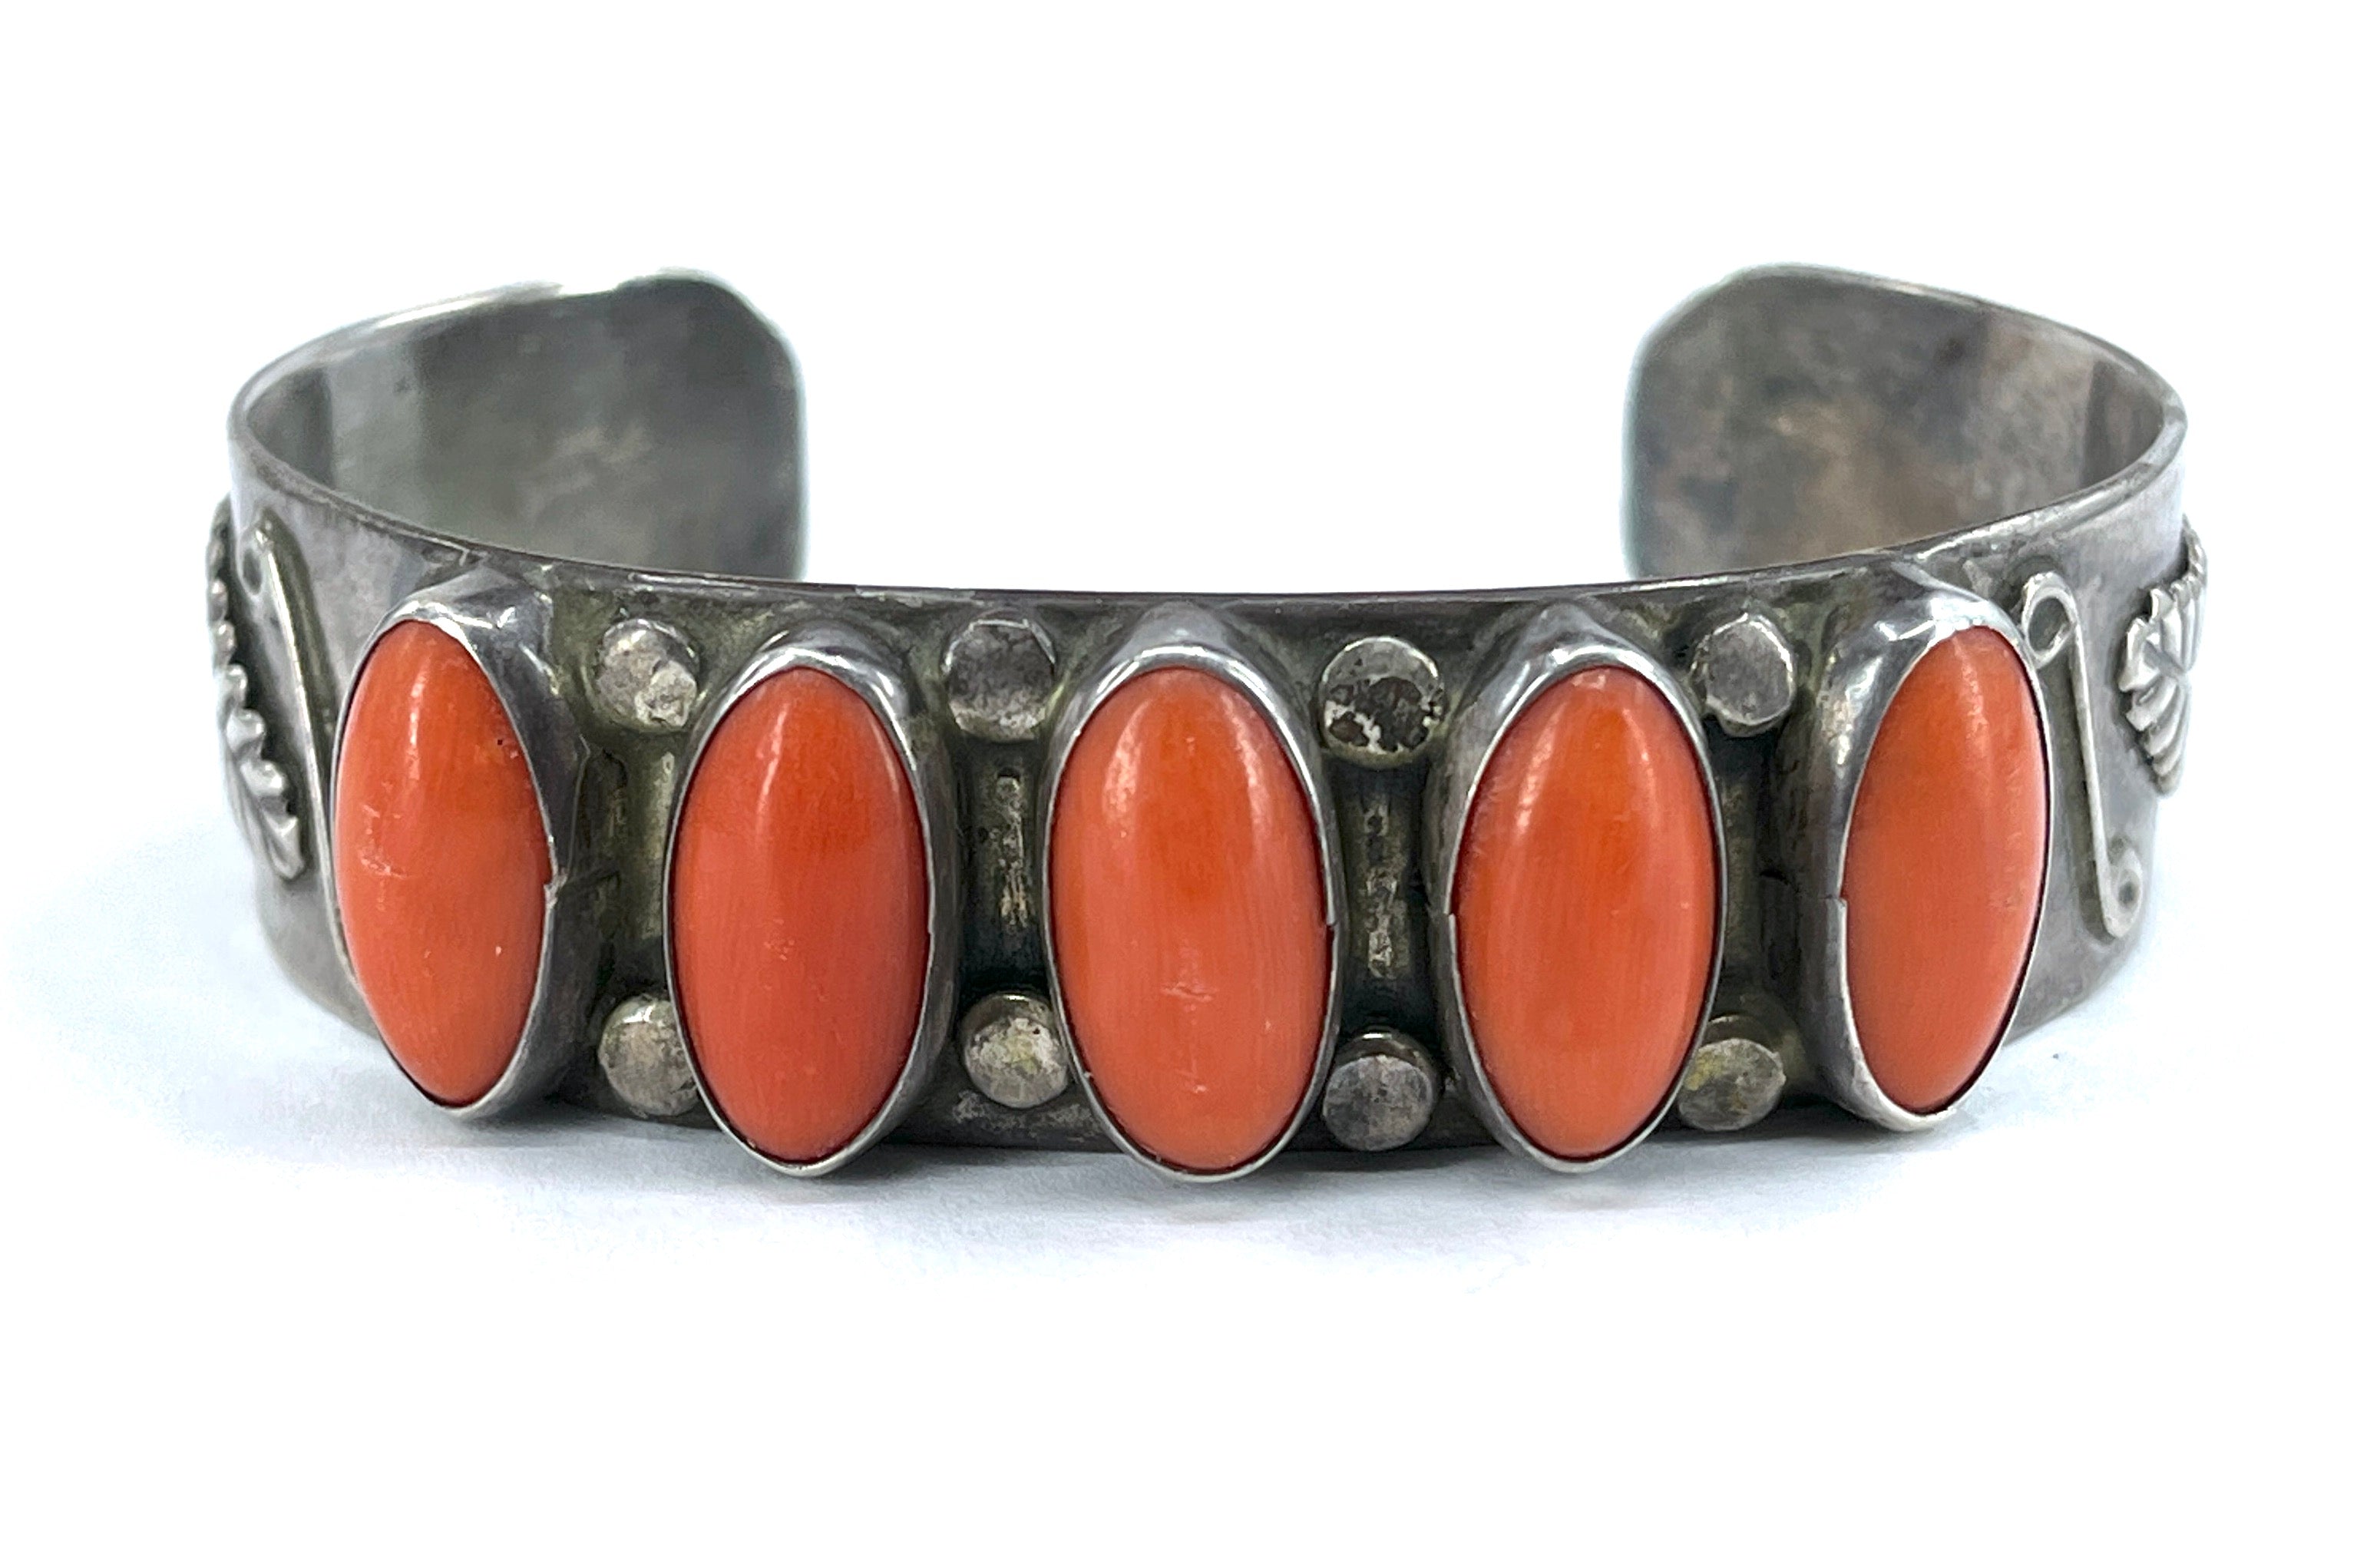 Antique Coral Cameo & Faceted Coral Bead Bracelet - Ruby Lane